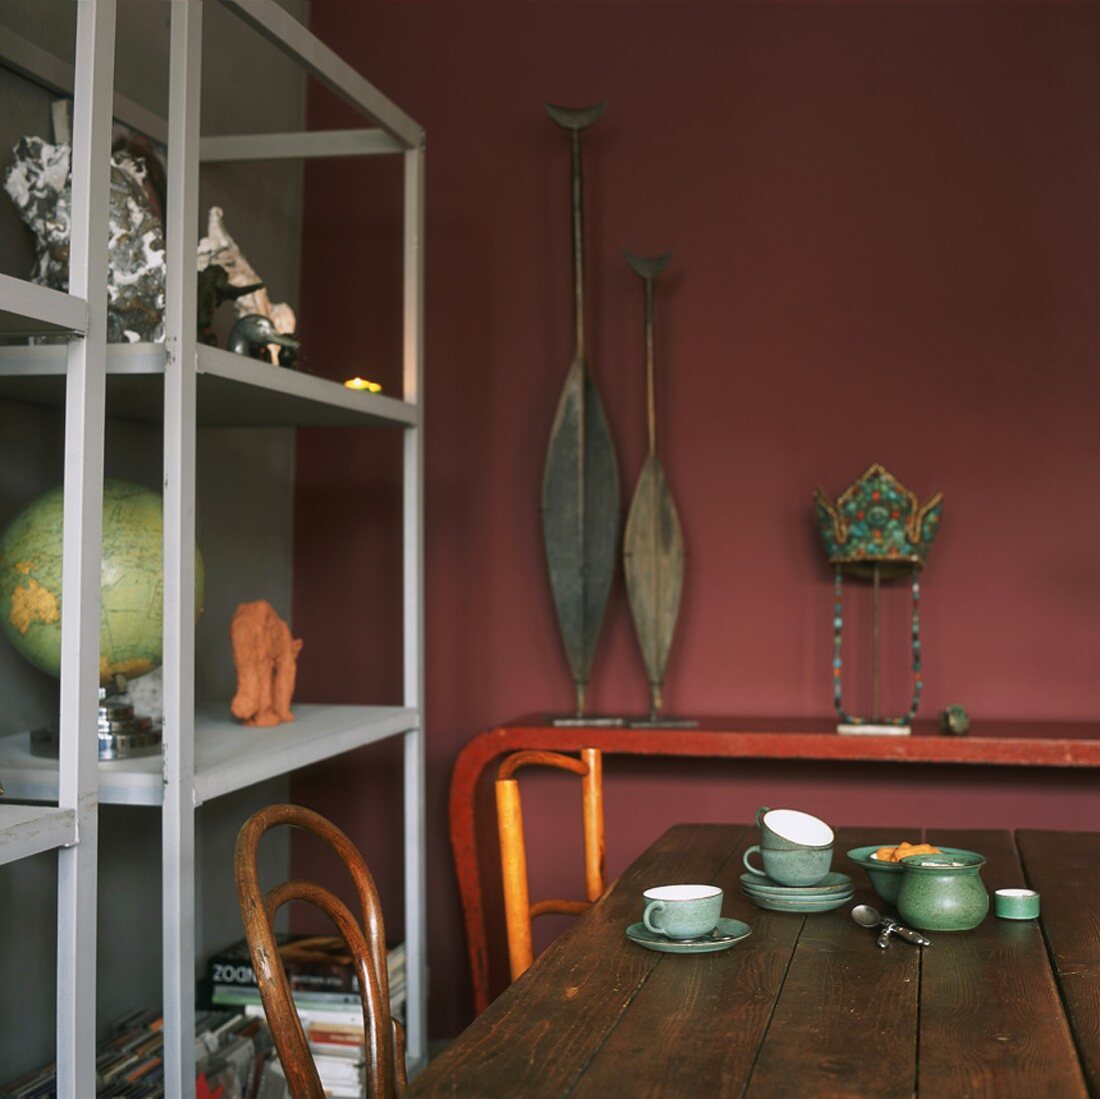 Detail of dining room with rustic wooden table and simple wooden shelves